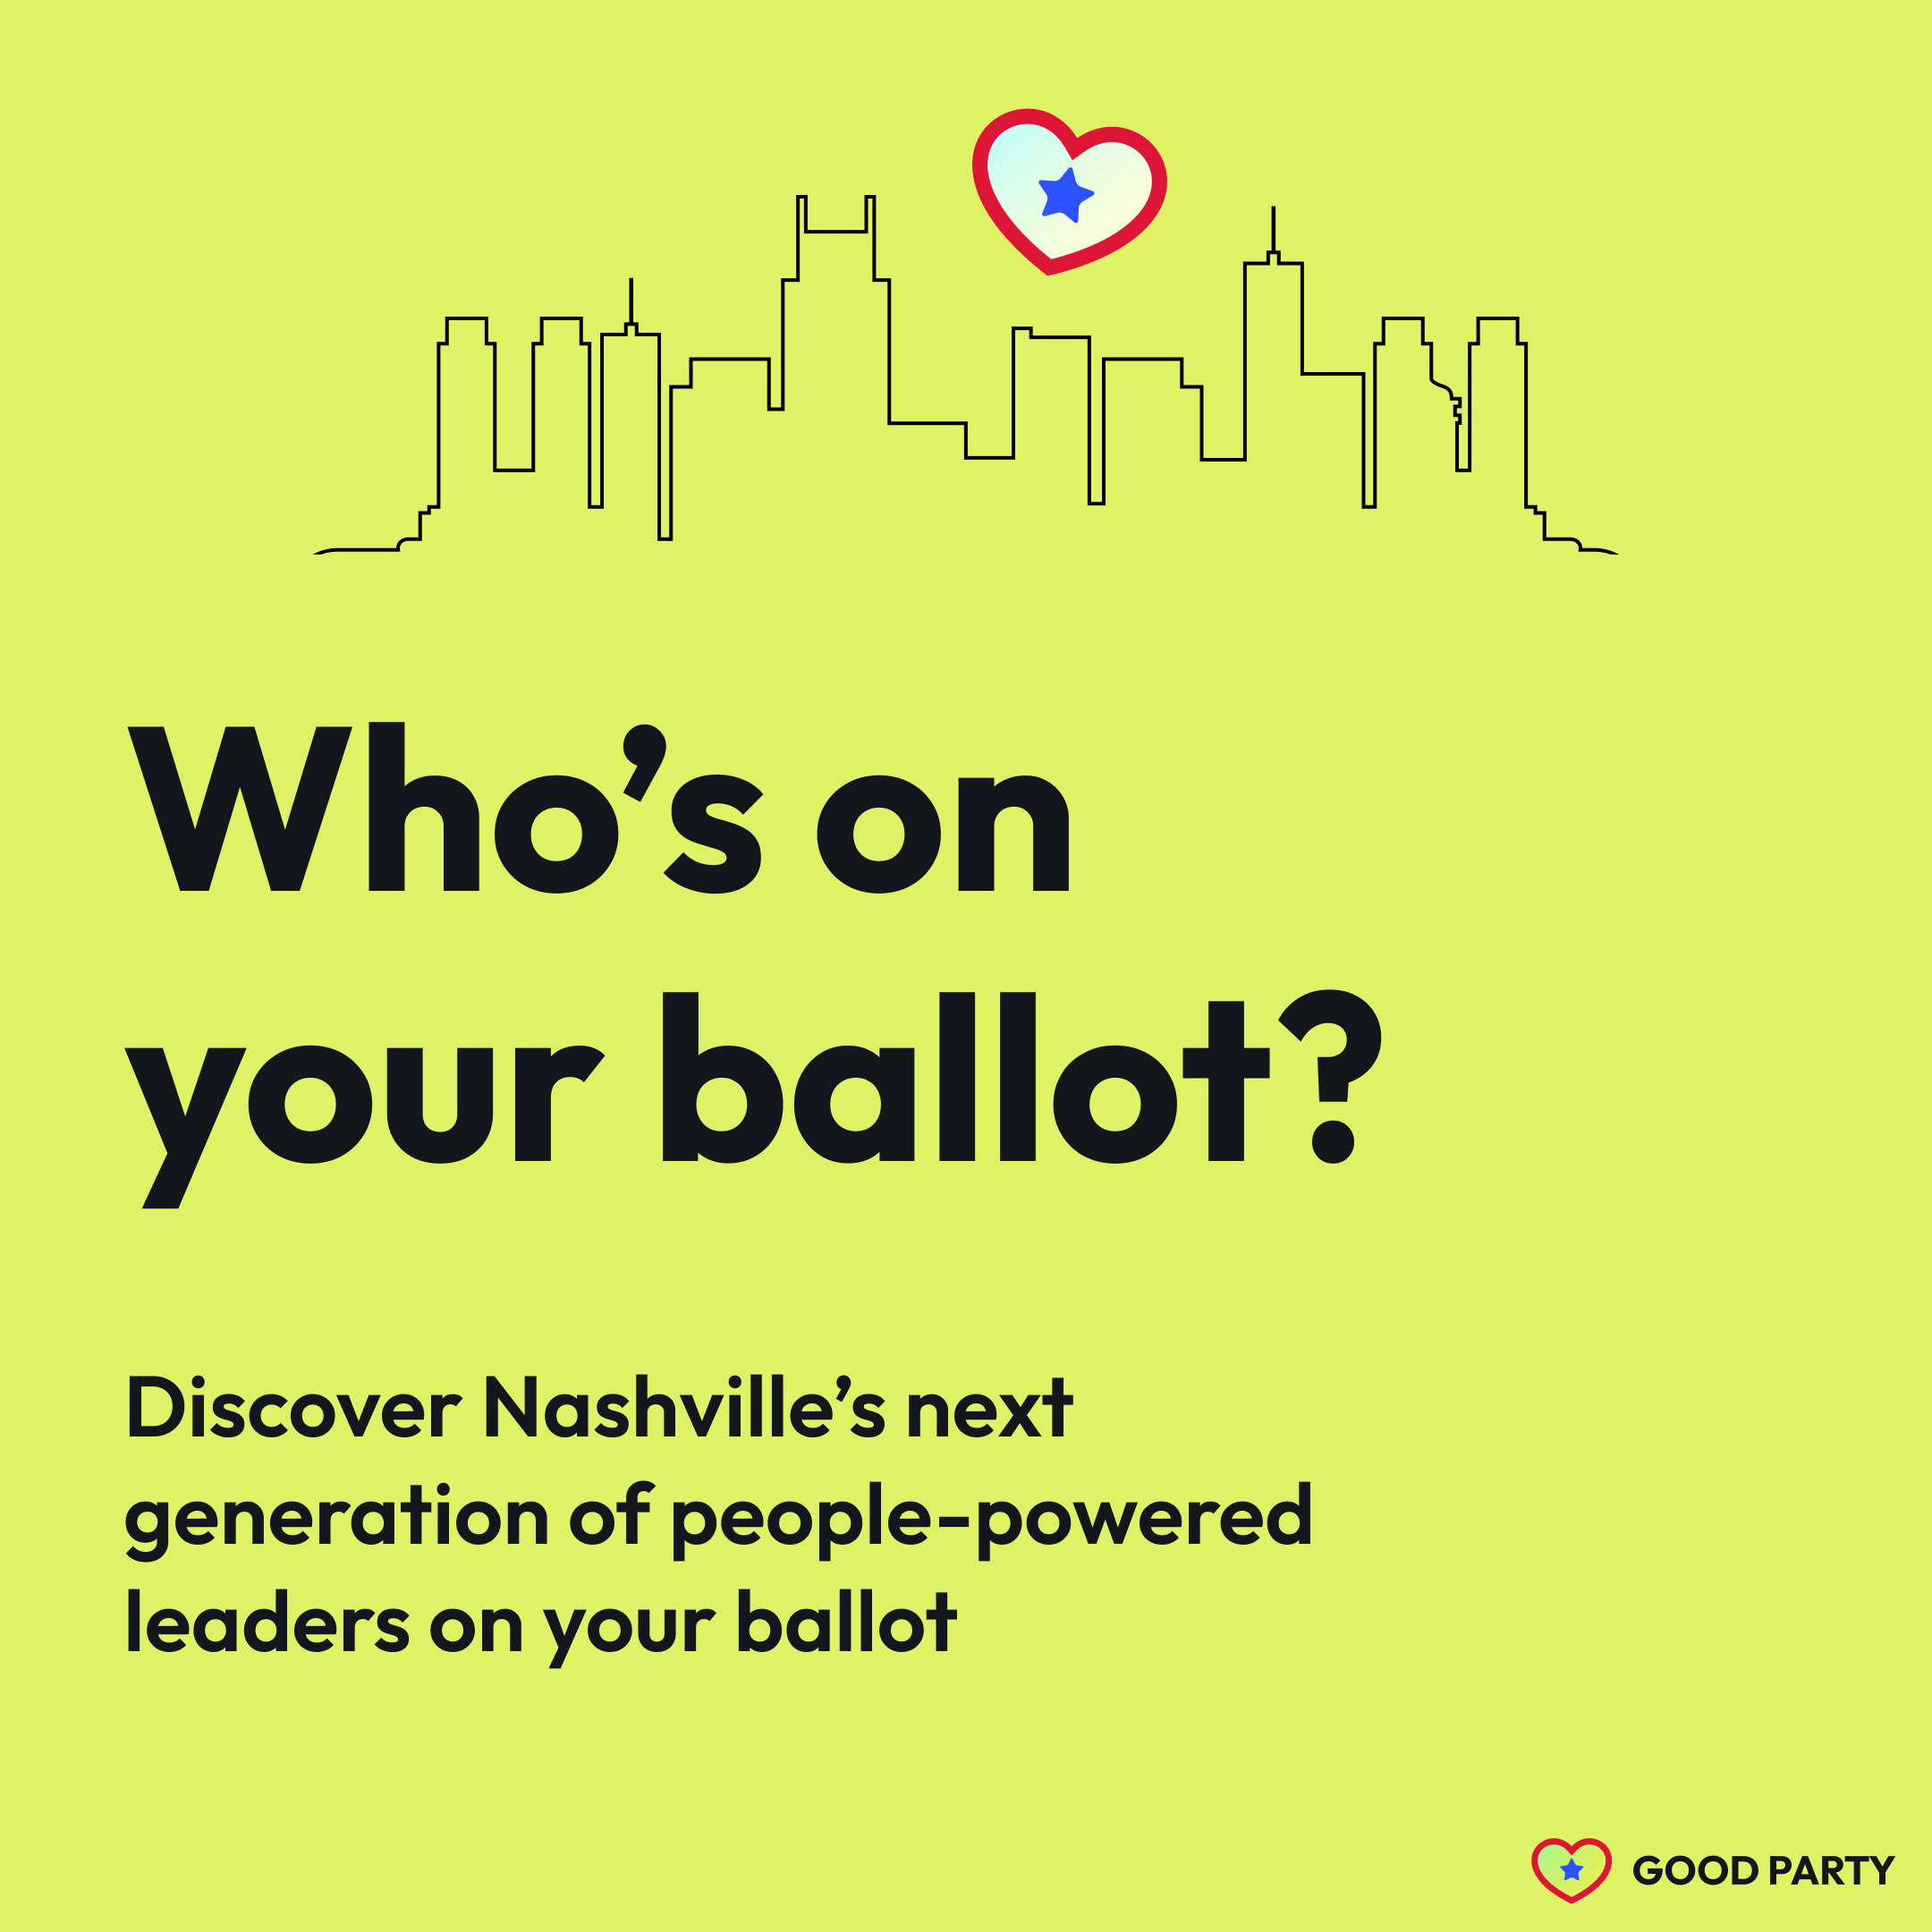 Who's on your ballot?